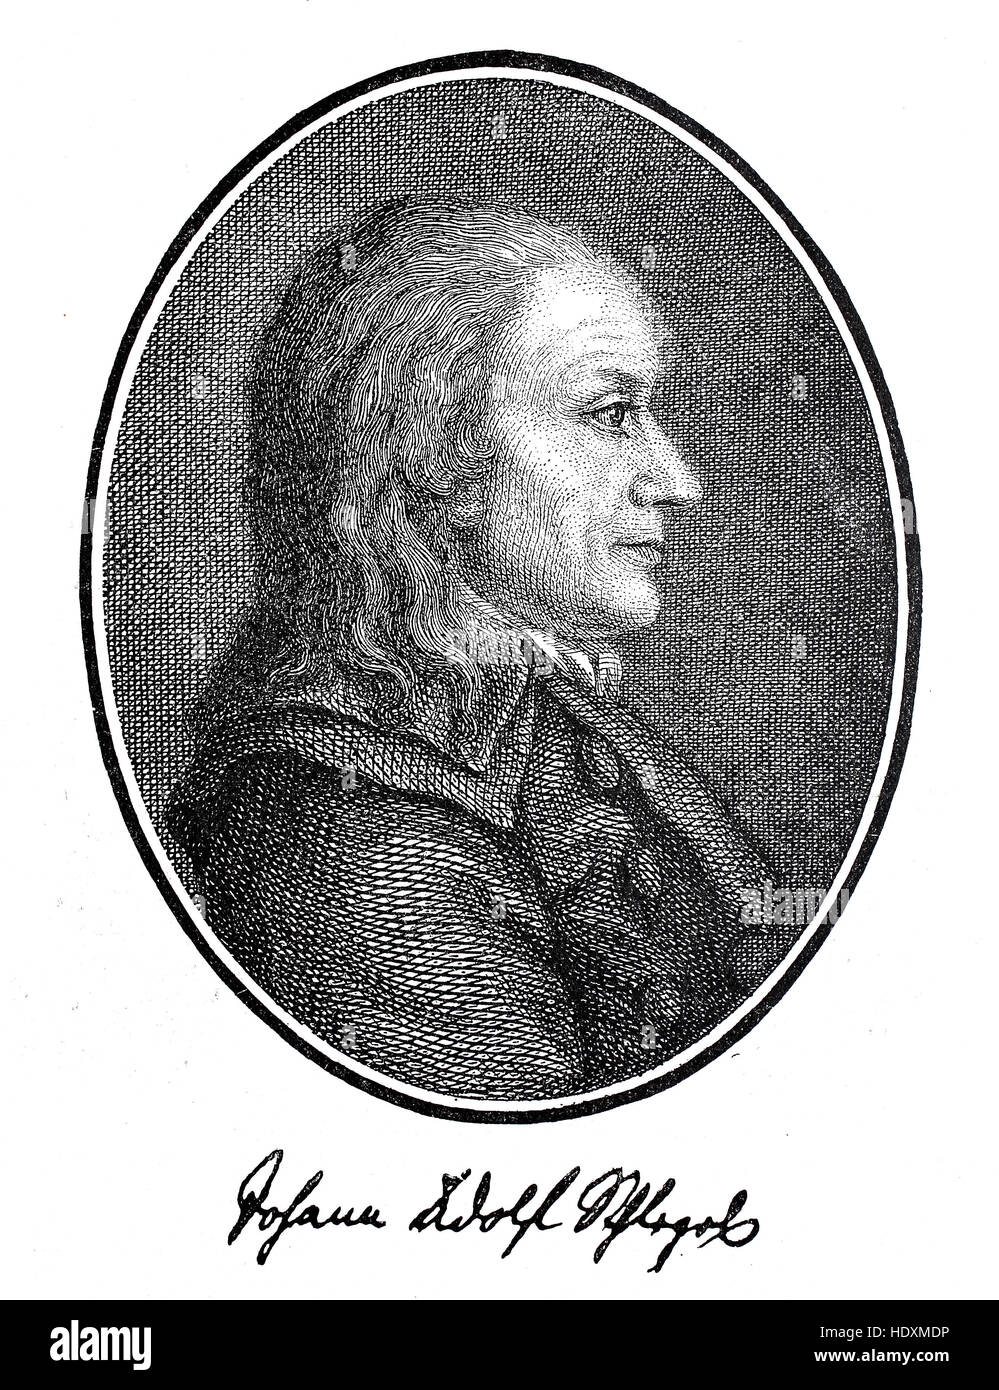 Johann Adolf Schlegel, 1721-1793, a German poet and clergyman, woodcut from the year 1882, digital improved Stock Photo